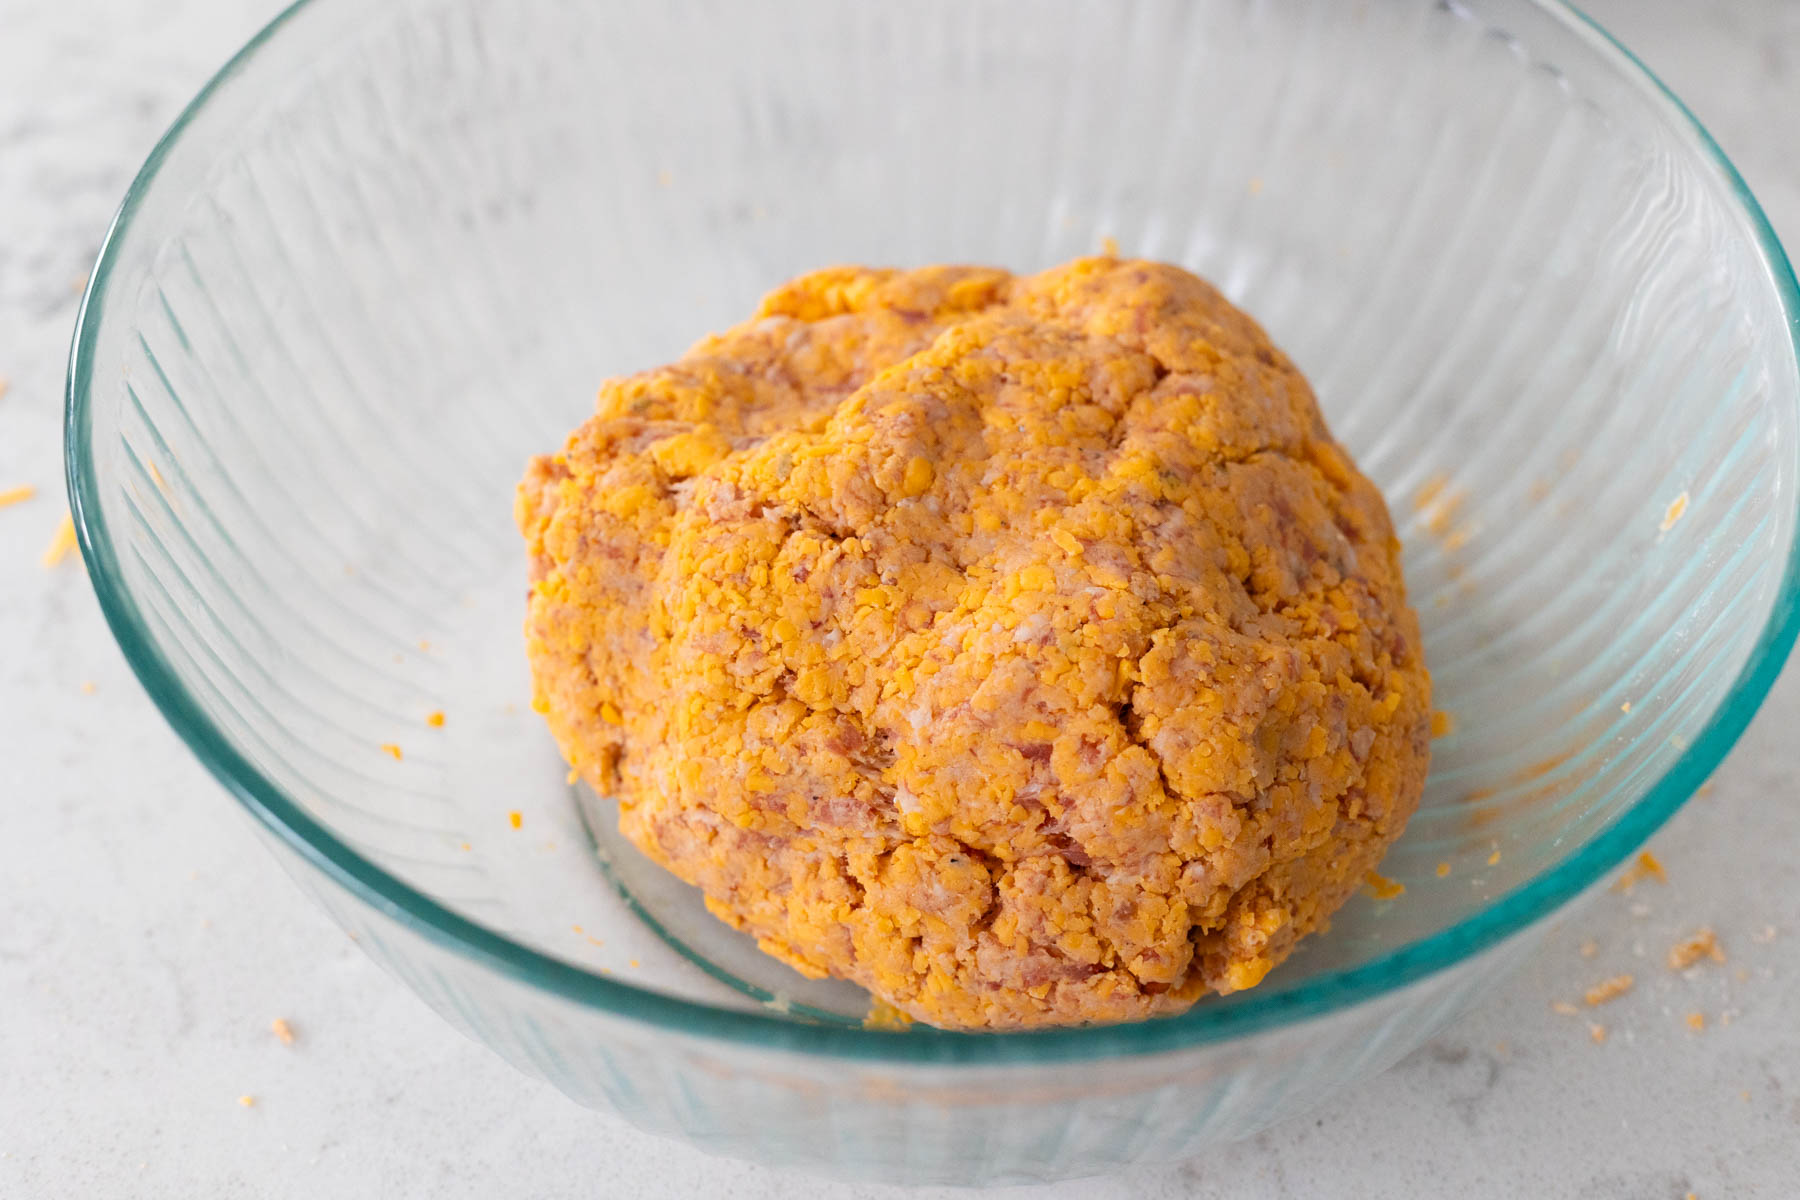 The sausage, cheese, and Bisquick mix have been kneaded together and formed a large ball.